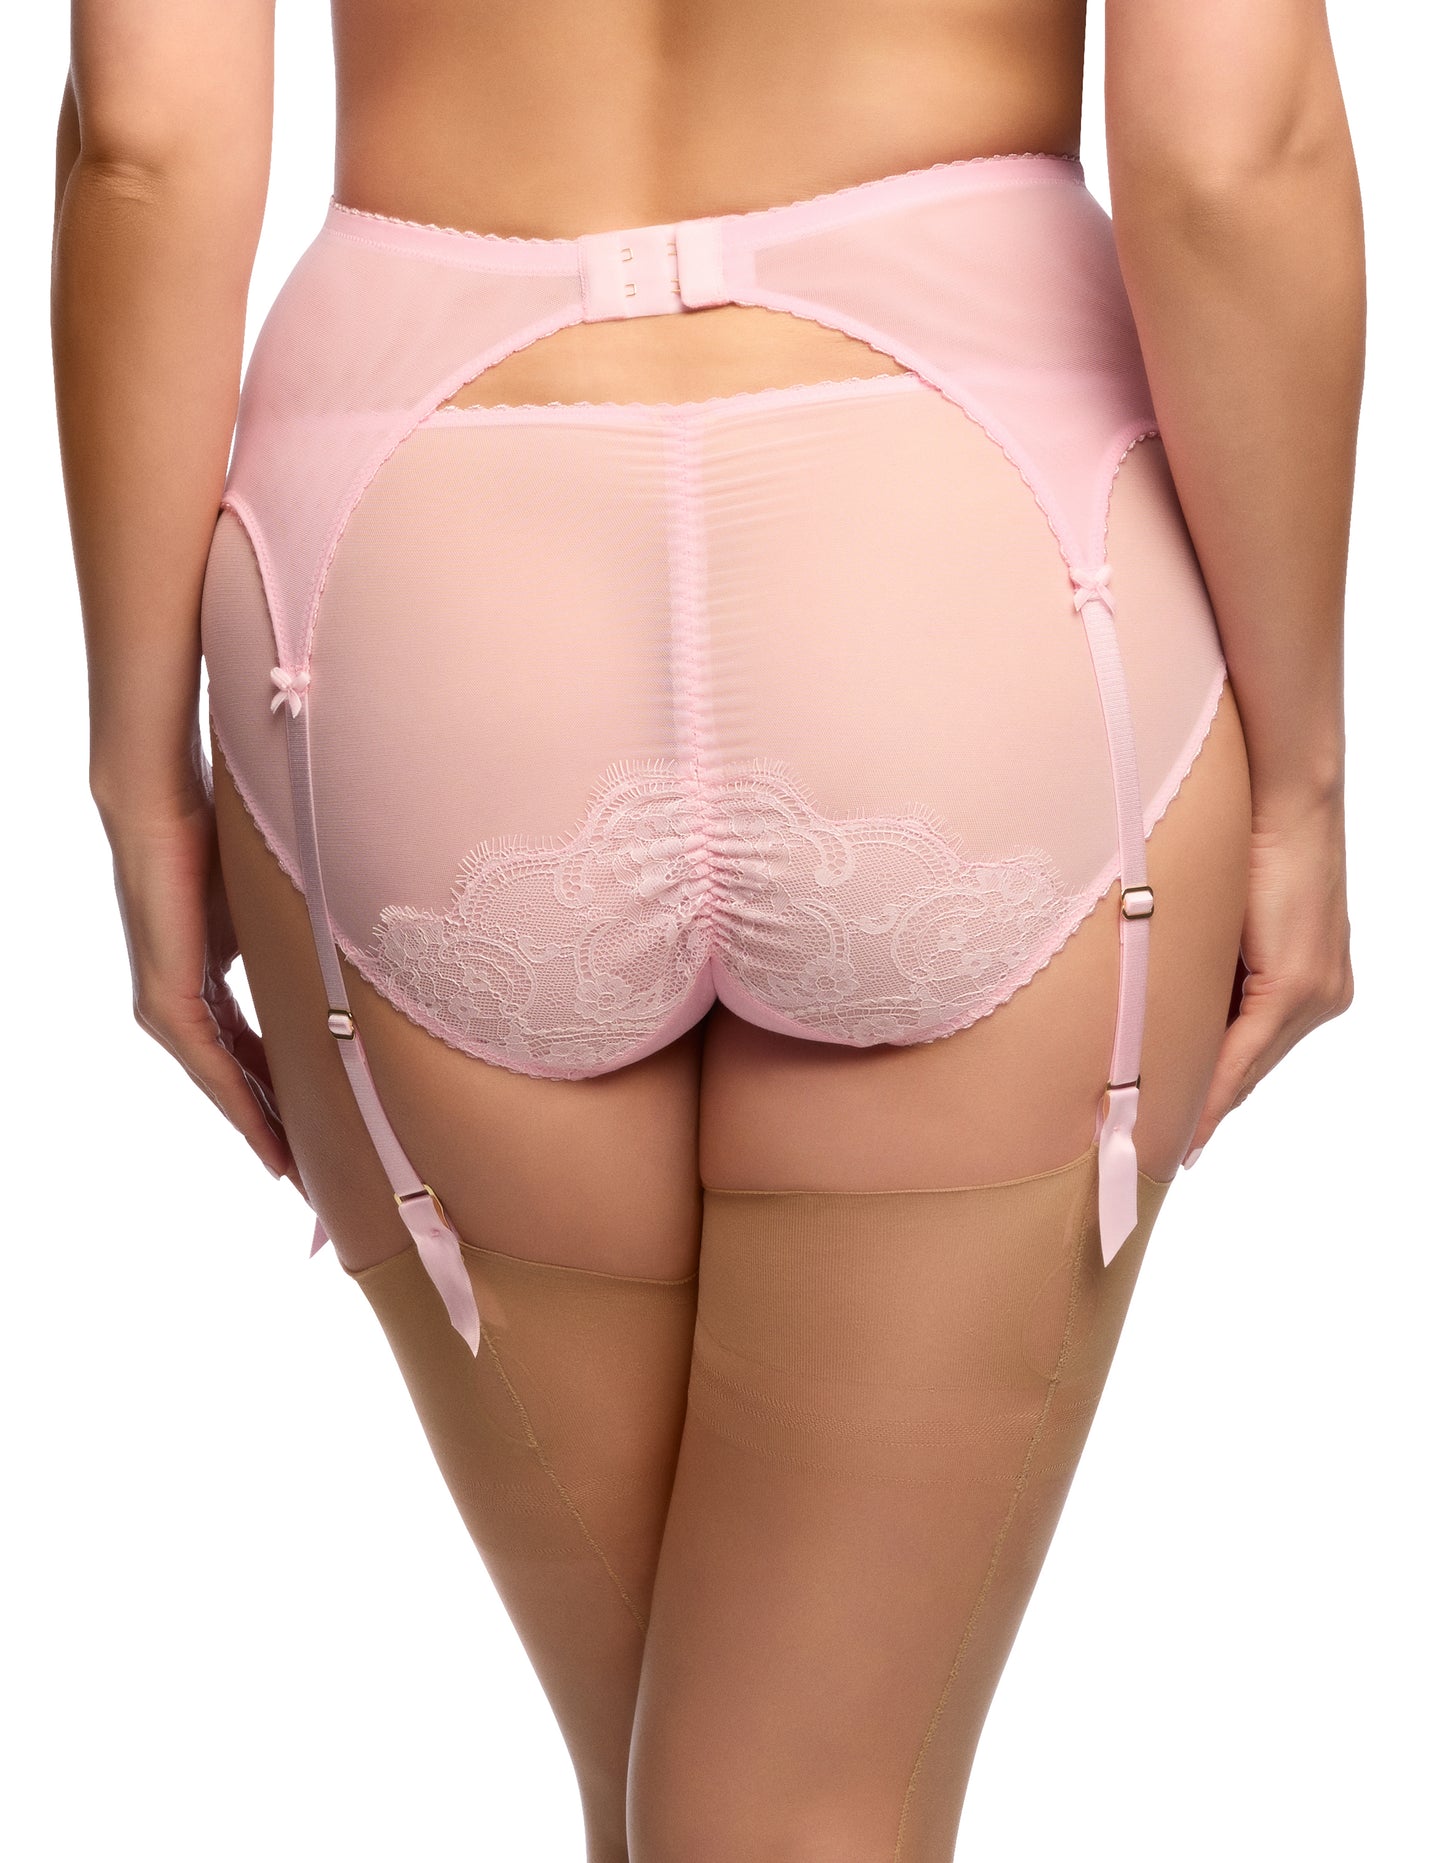 Muse Six Strap Belt in Cameo Pink By Dita Von Teese - sizes XS-XL